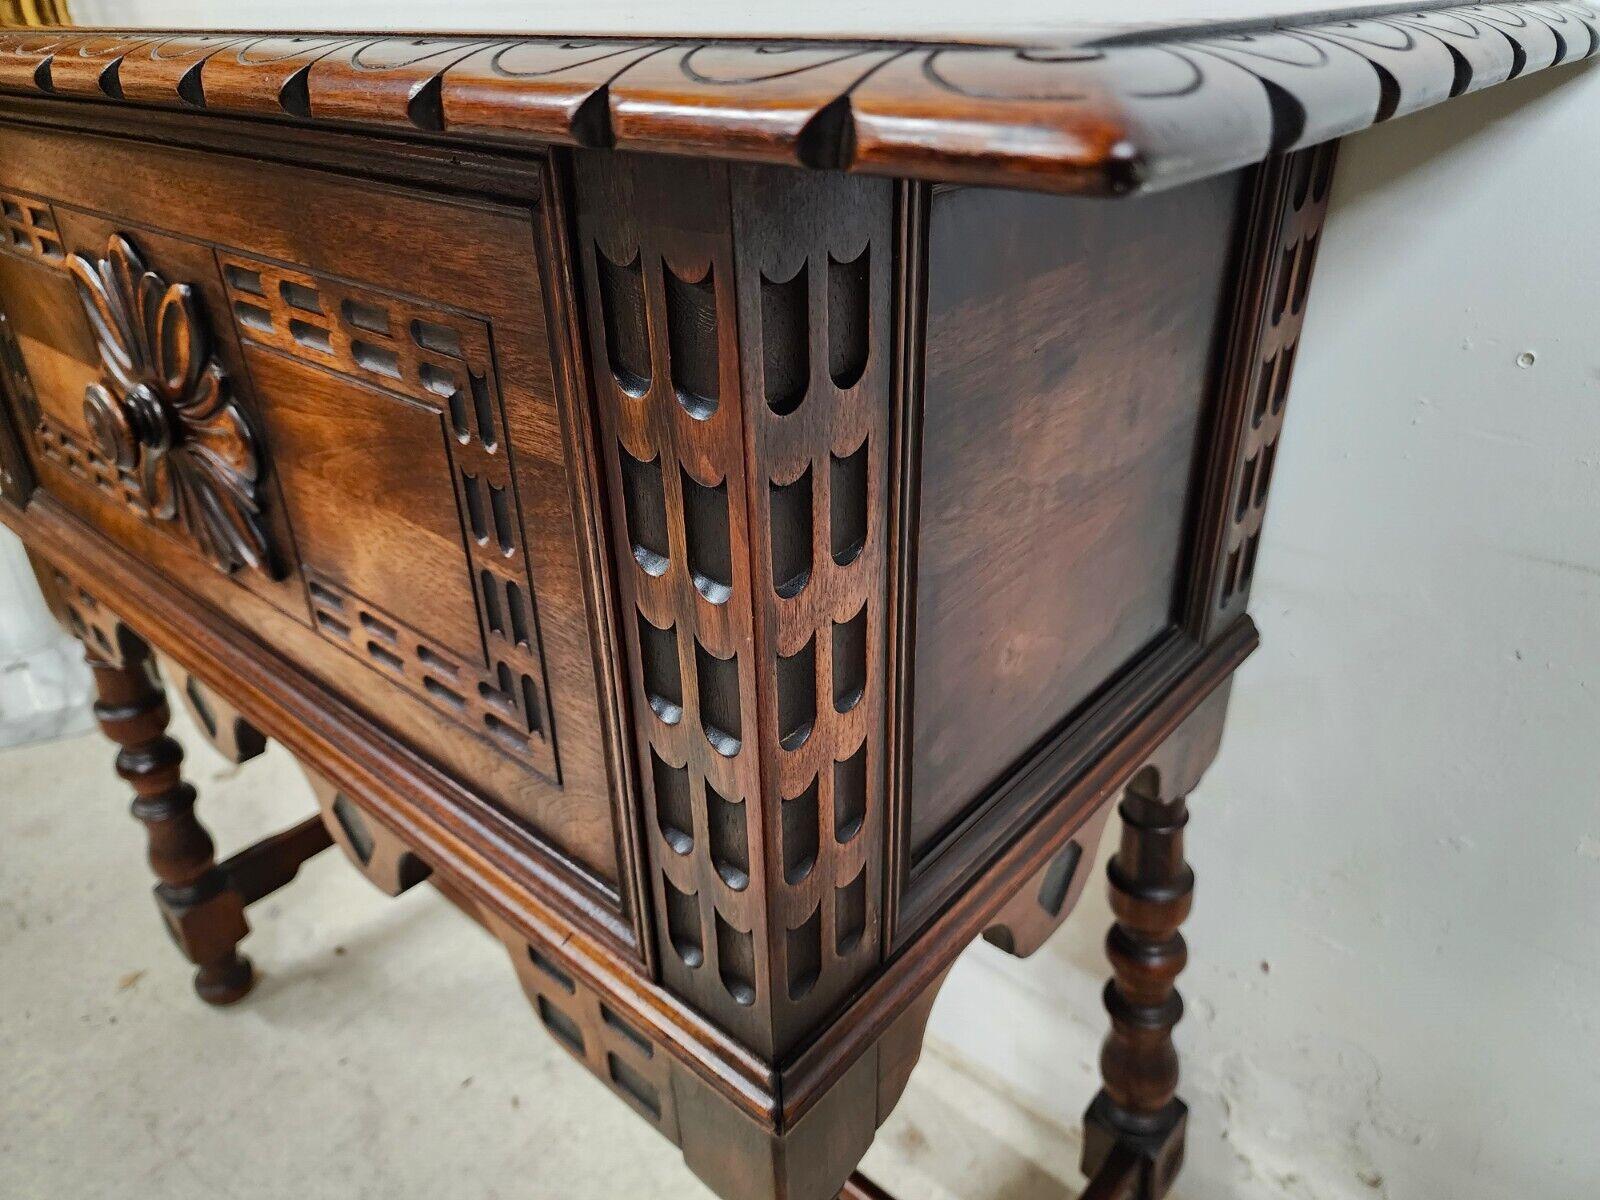 For FULL item description click on CONTINUE READING at the bottom of this page.

Offering One Of Our Recent Palm Beach Estate Fine Furniture Acquisitions Of A 
Antique Walnut Console Buffet Sideboard Table by KITTINGER

Approximate Measurements in